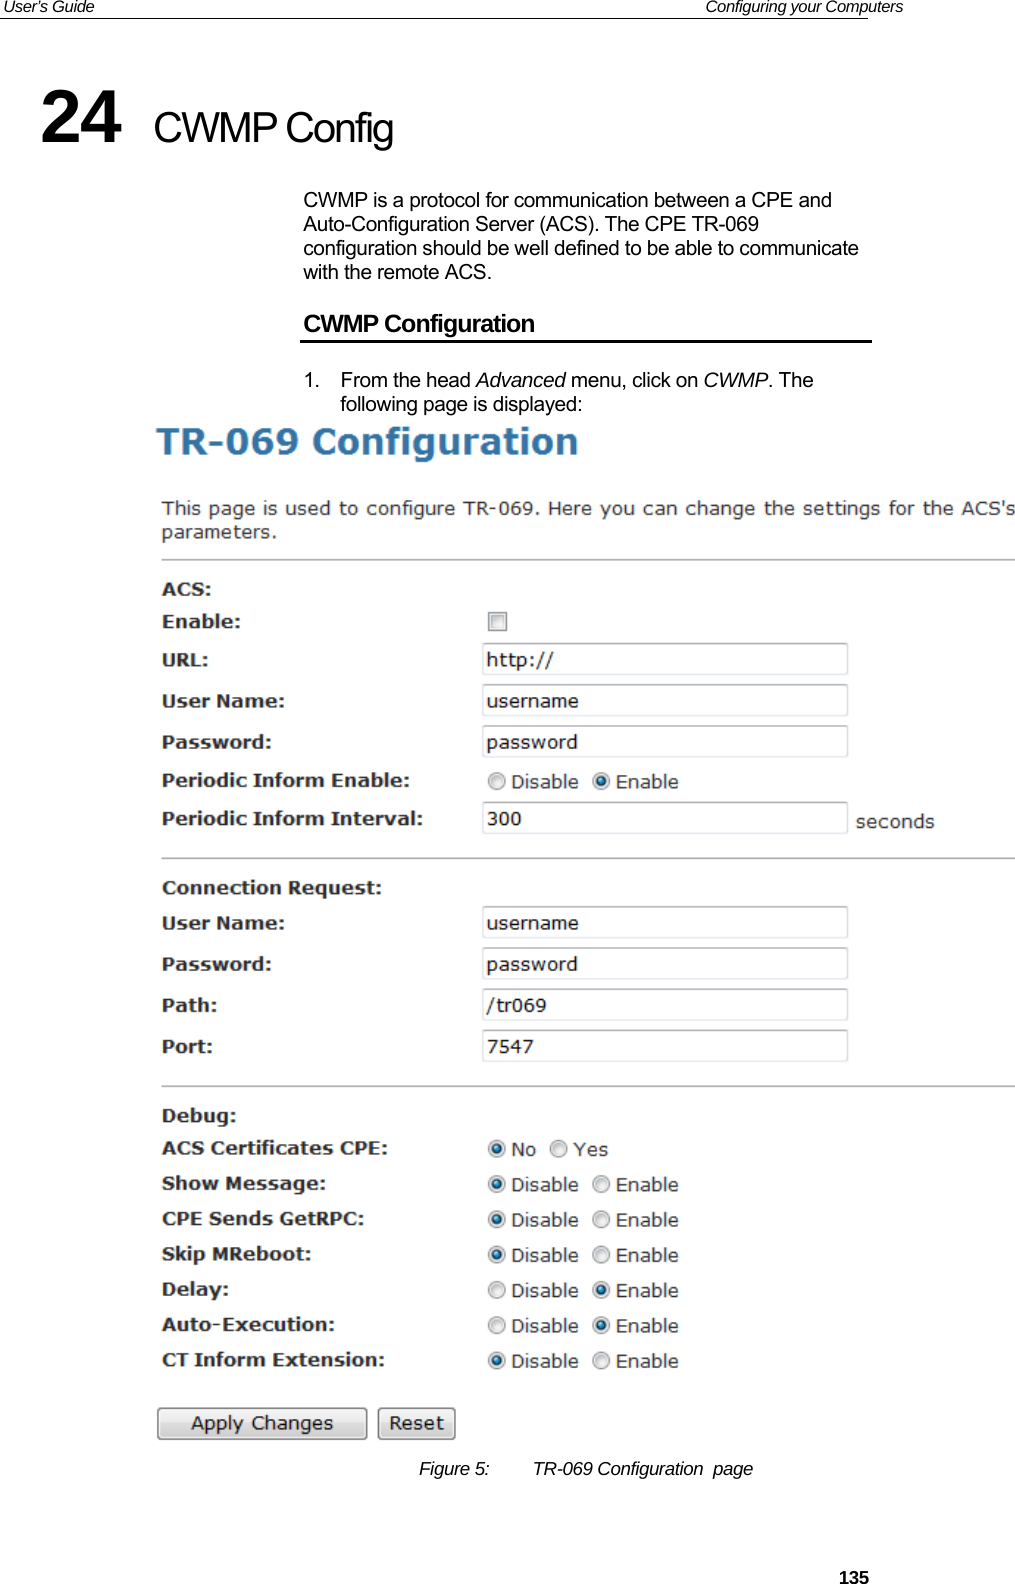 User’s Guide   Configuring your Computers 24  CWMP Config CWMP is a protocol for communication between a CPE and Auto-Configuration Server (ACS). The CPE TR-069 configuration should be well defined to be able to communicate with the remote ACS. CWMP Configuration 1. From the head Advanced menu, click on CWMP. The following page is displayed:  Figure 5:  TR-069 Configuration  page   135